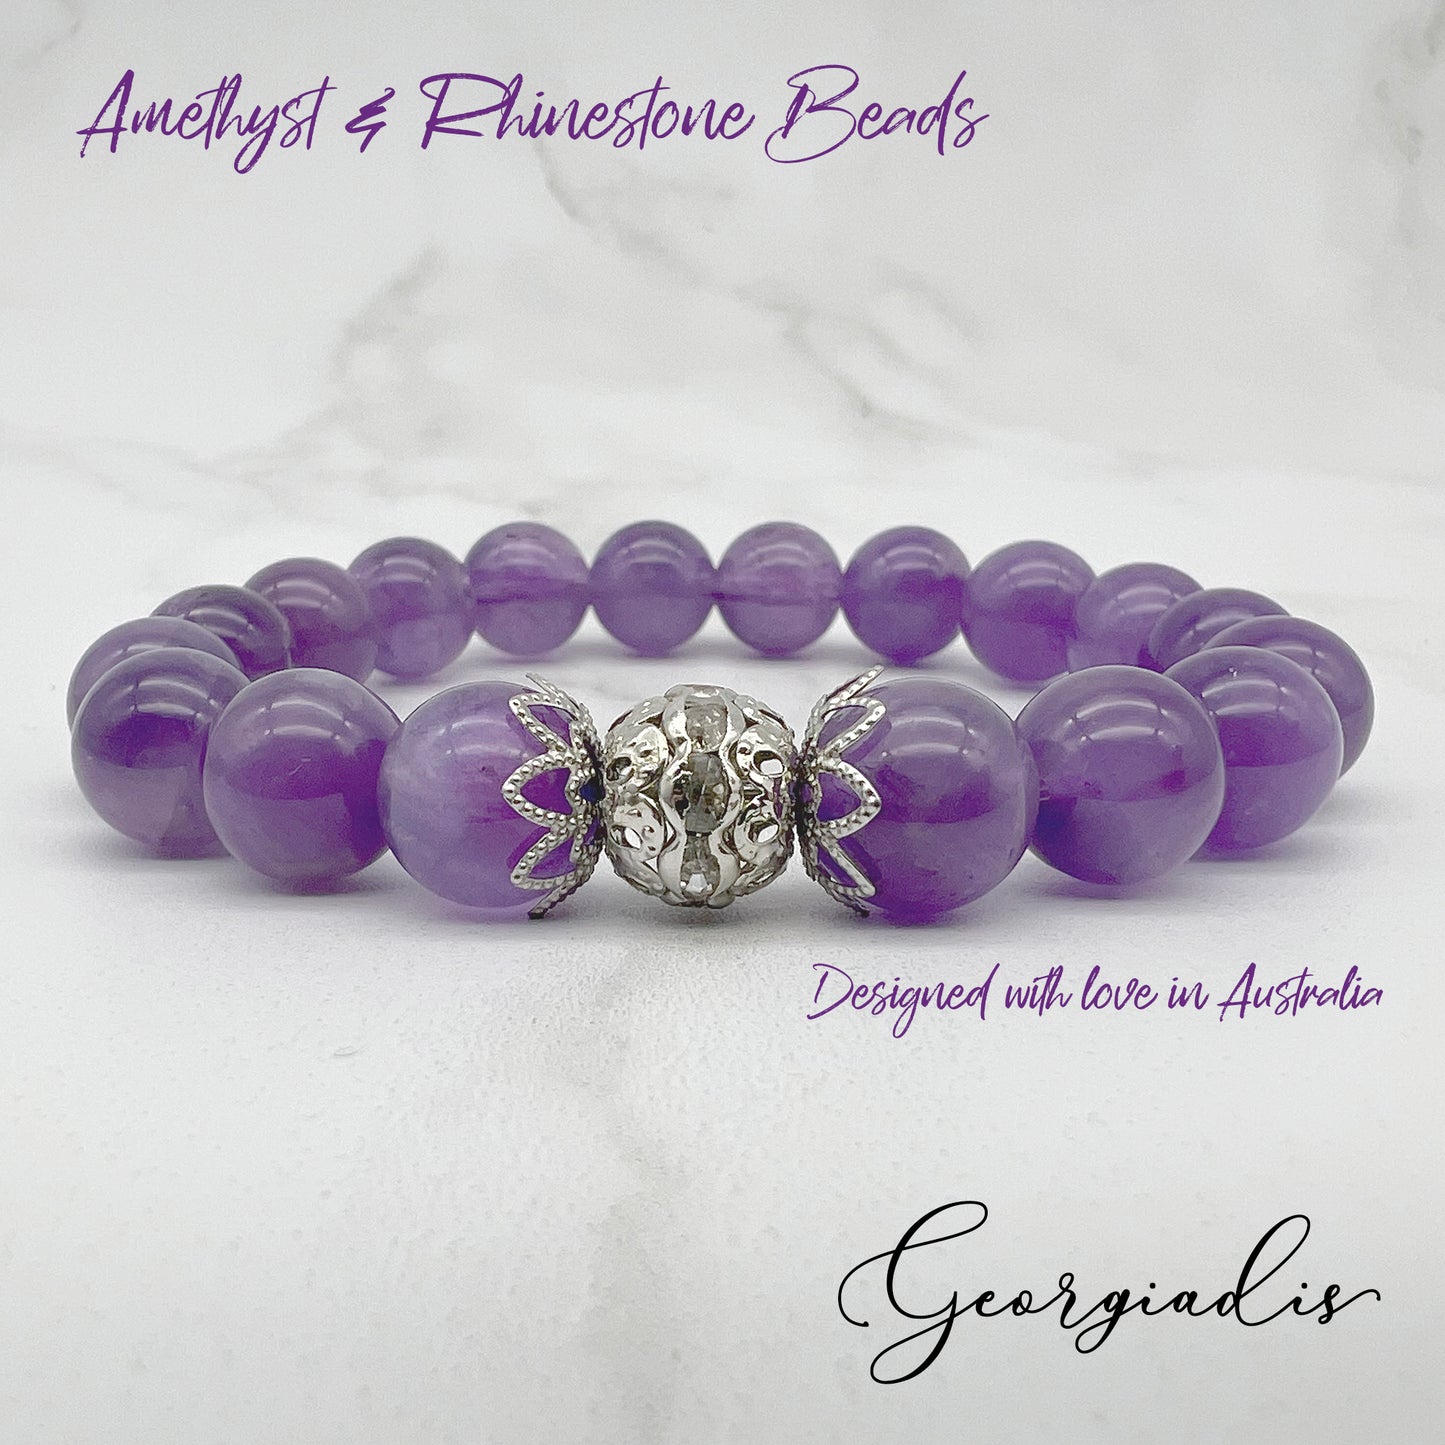 10mm Amethyst Natural Genuine Gemstone with Stunning Spacer Bead Inlaid with Rhinestones, Calming, Promotes Spiritual Awareness, Colour Therapy Purple